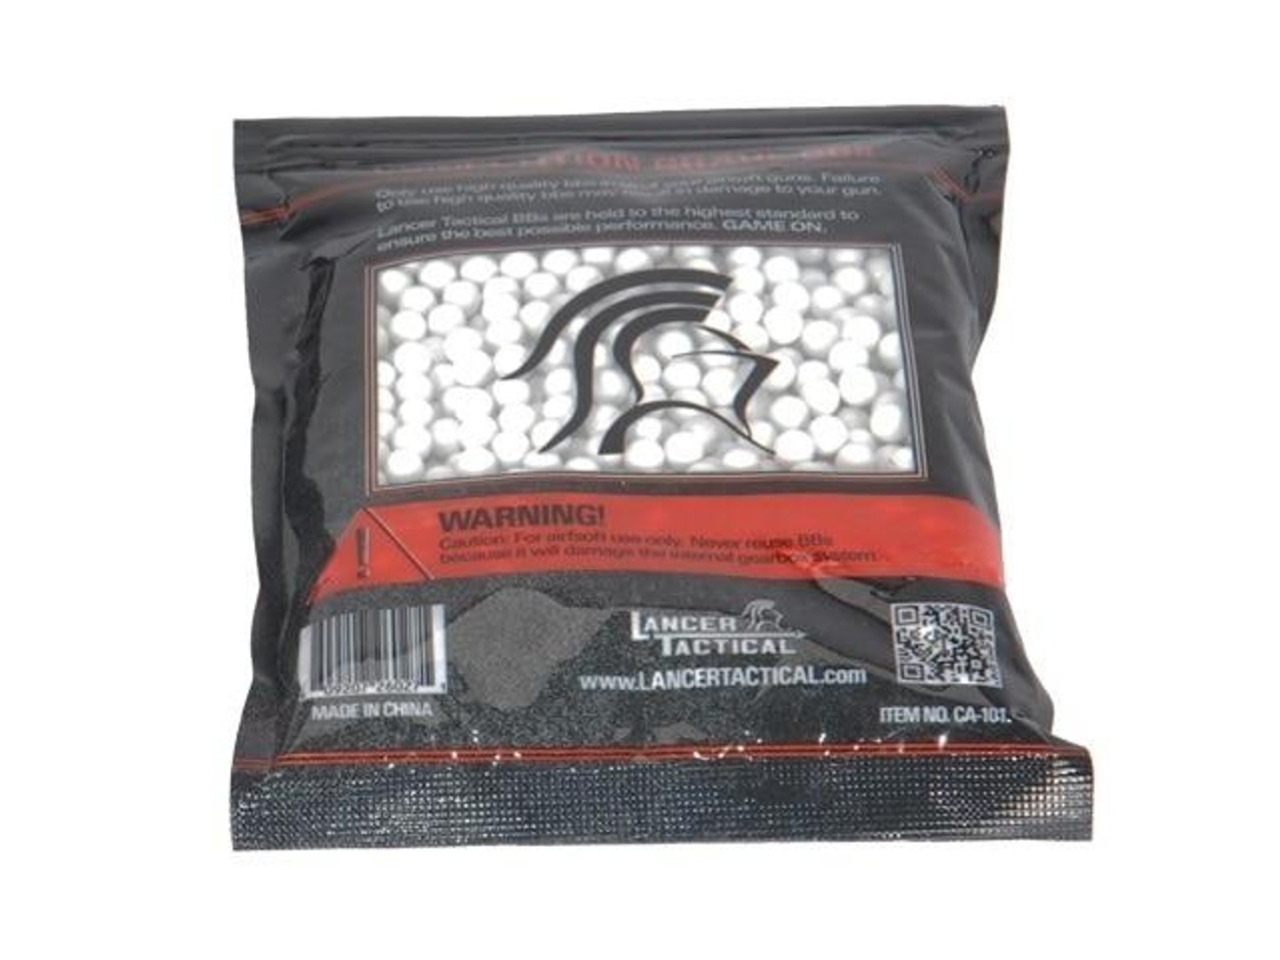 Lancer Tactical Seamless 0.20g Airsoft BB 1000 Rds, 6mm, 1000 Count 6mm